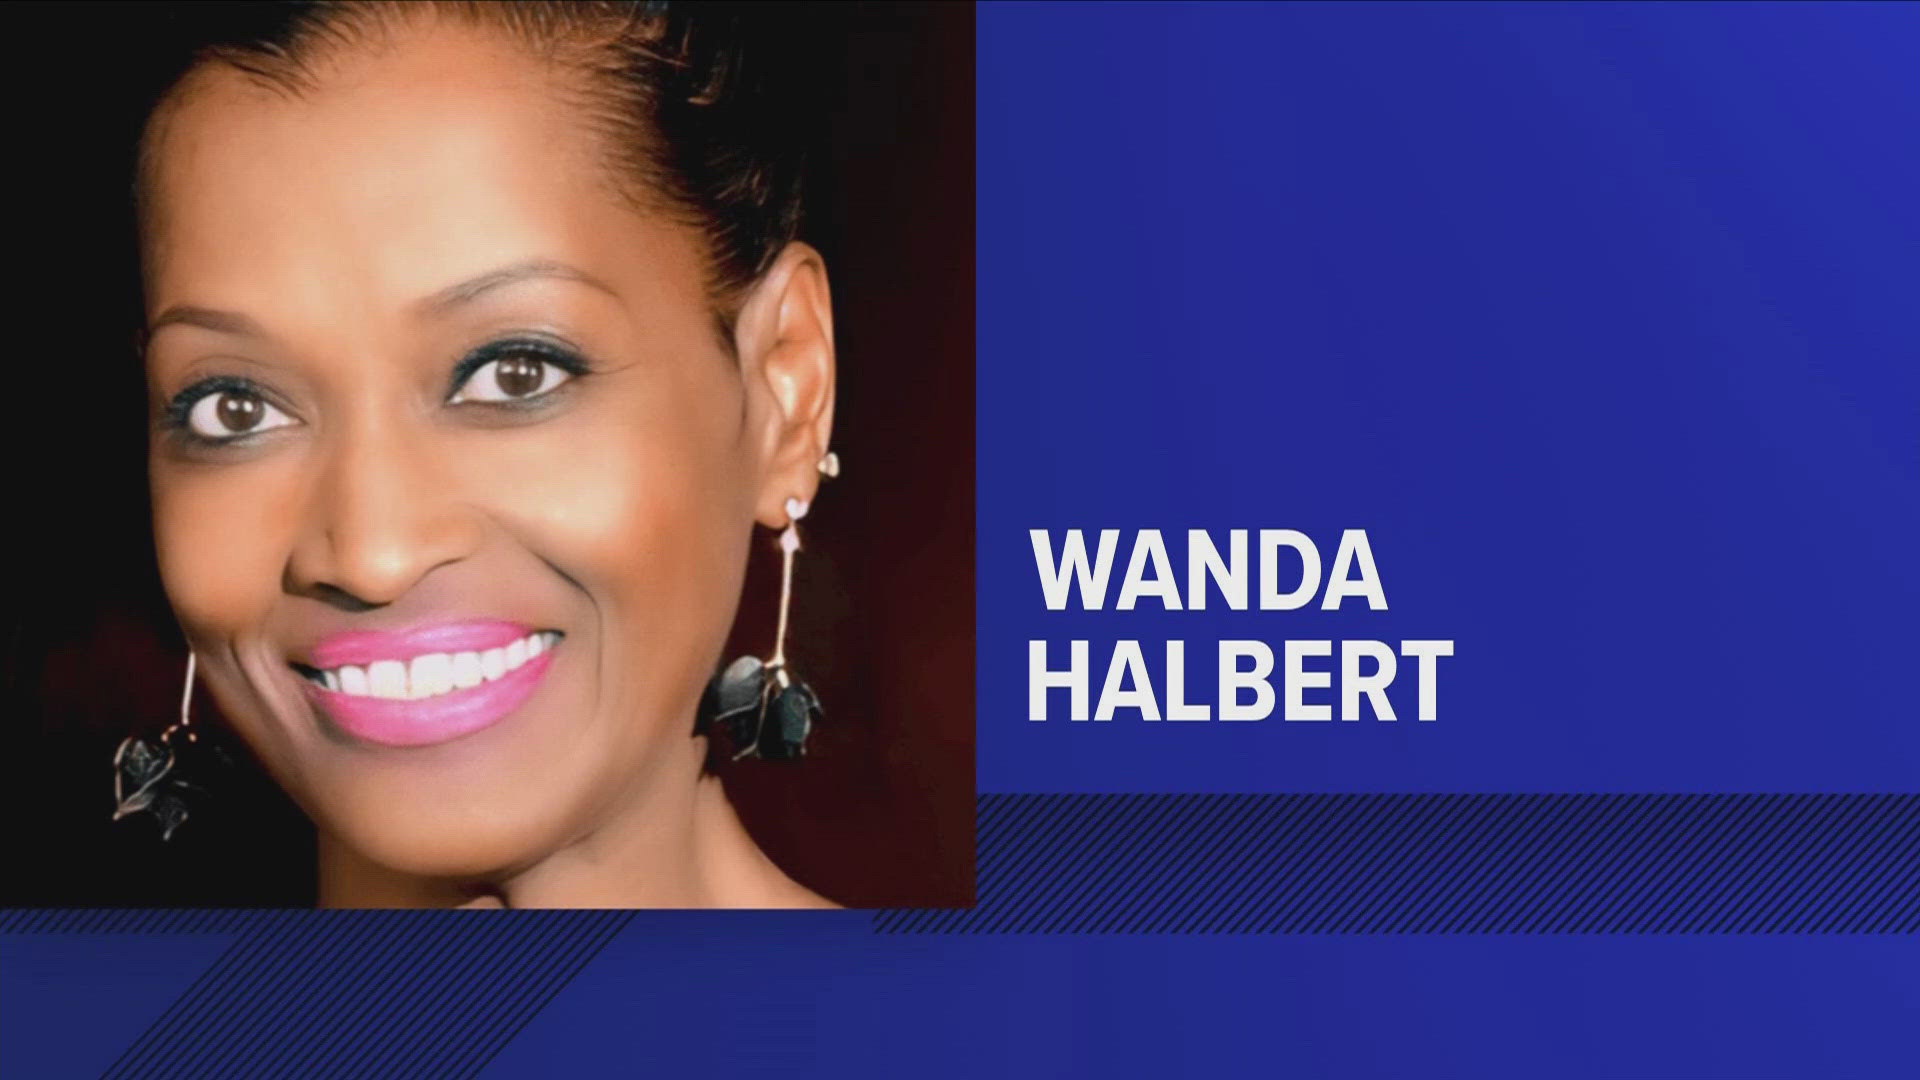 ABC24 obtained documents showing Shelby County Clerk Wanda Halbert had failed to submit on-time and accurate monthly financial filings.